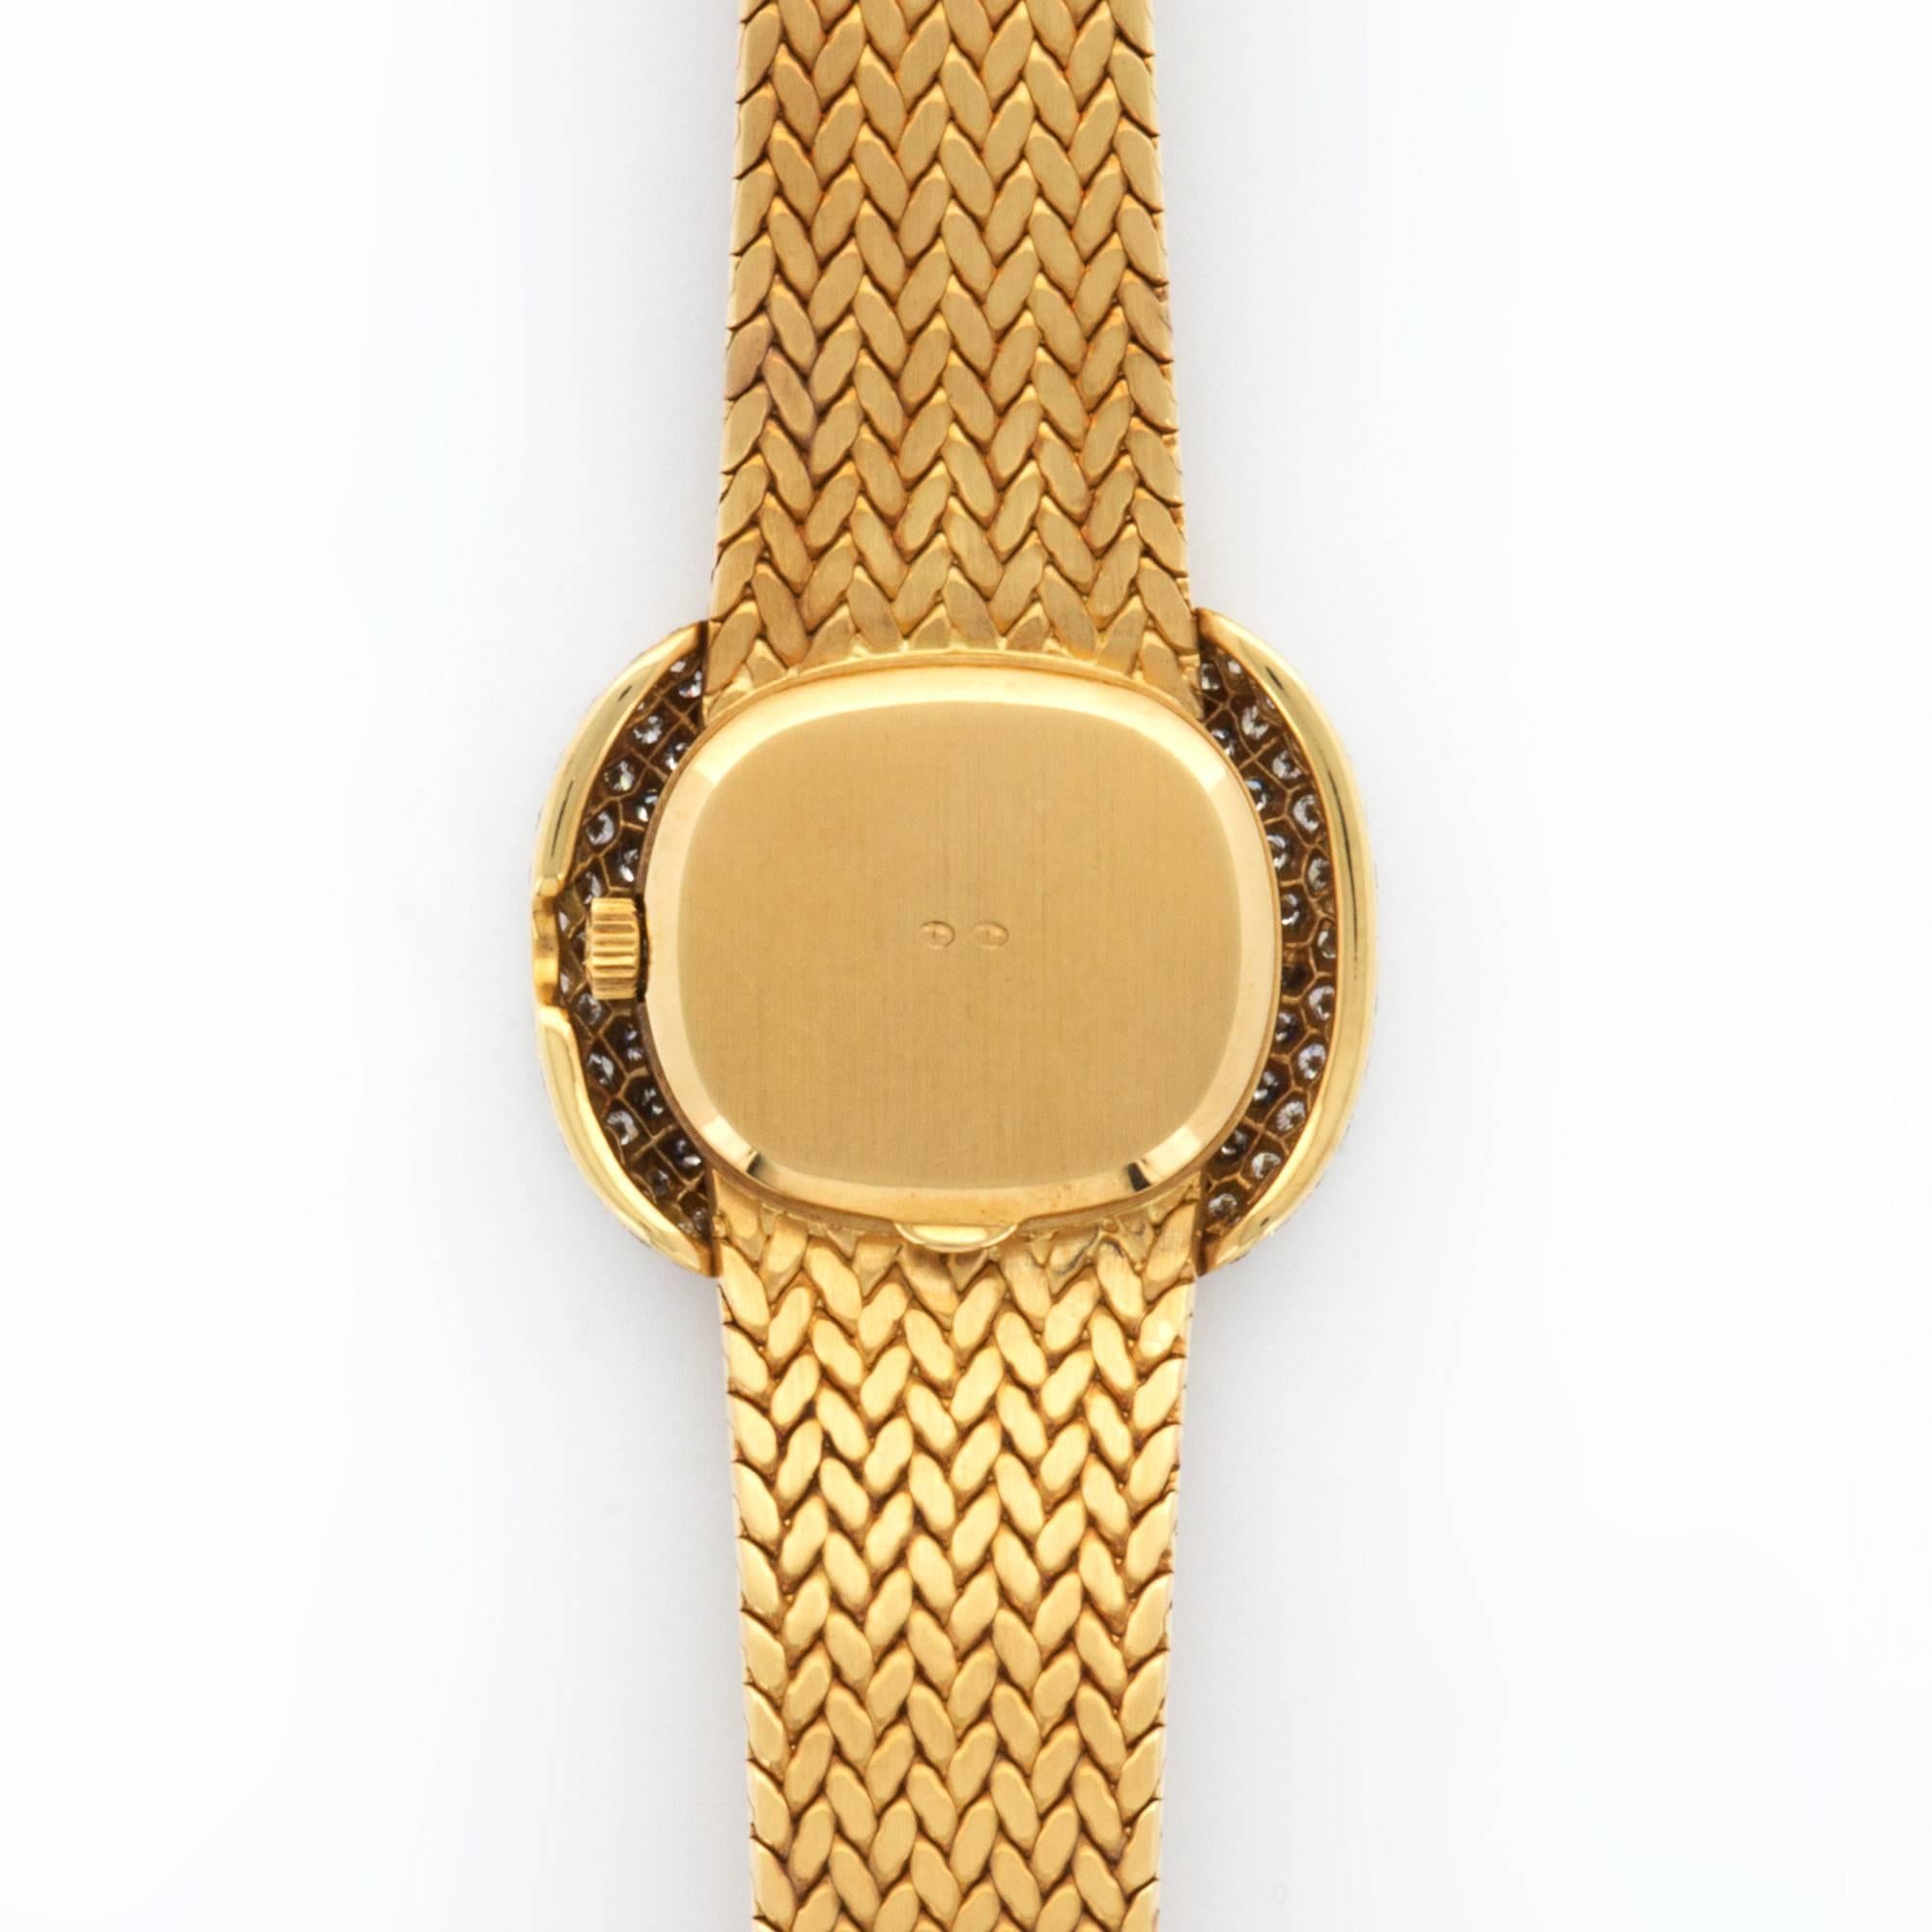 A 1970's Lady's Patek Philippe Diamond and Lapis Bracelet Watch in 18k Yellow Gold. 

Ref. 4287/3

Manual-Wind